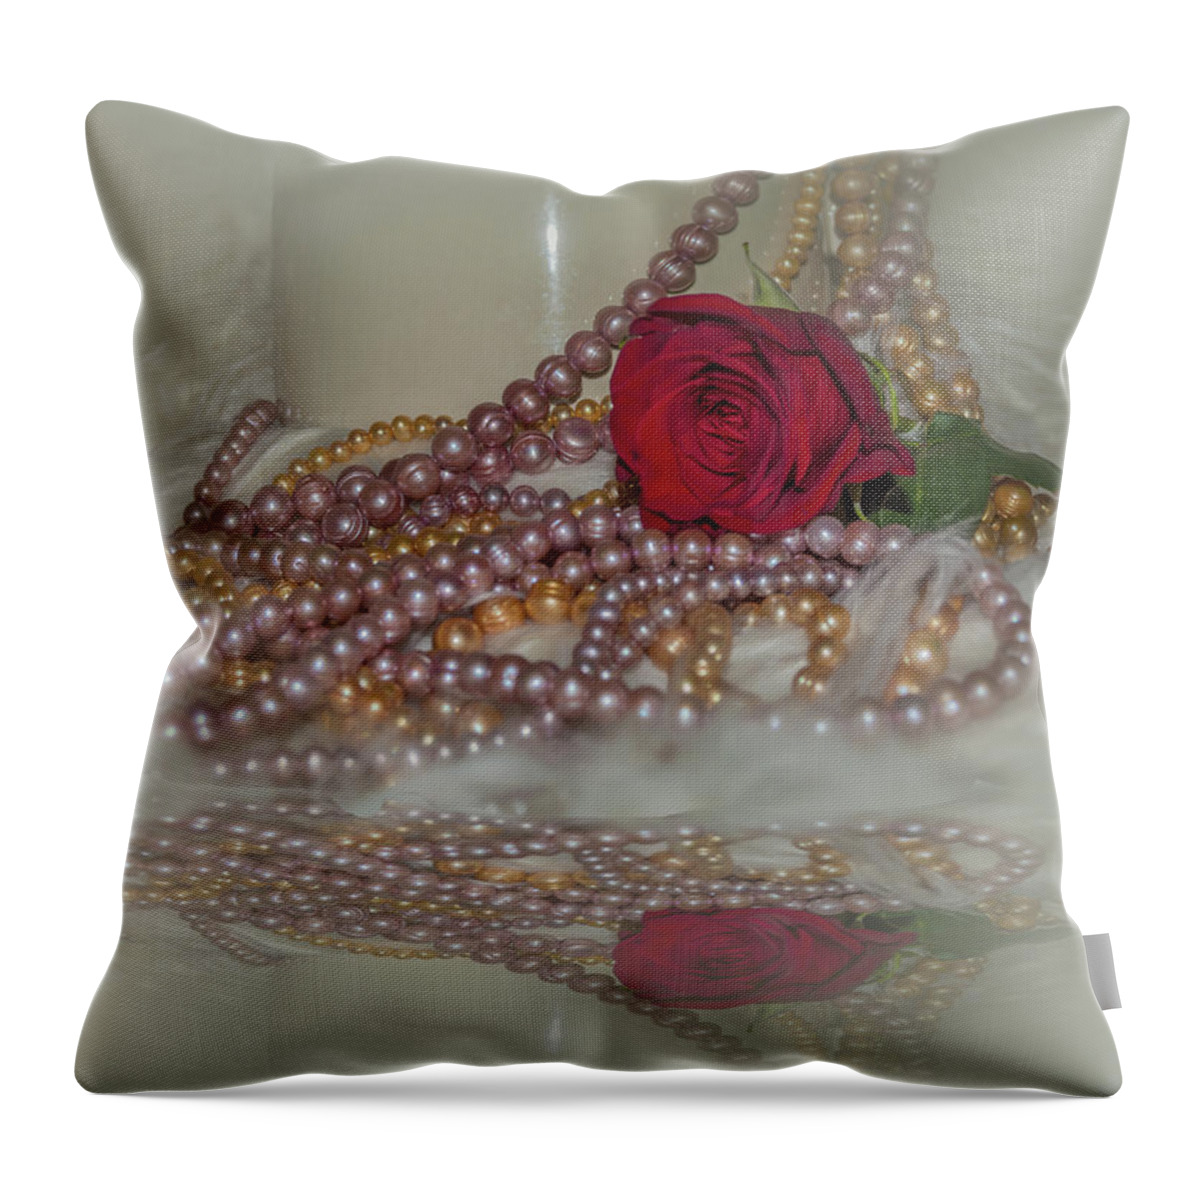 Rose Throw Pillow featuring the photograph Rose by Leticia Latocki